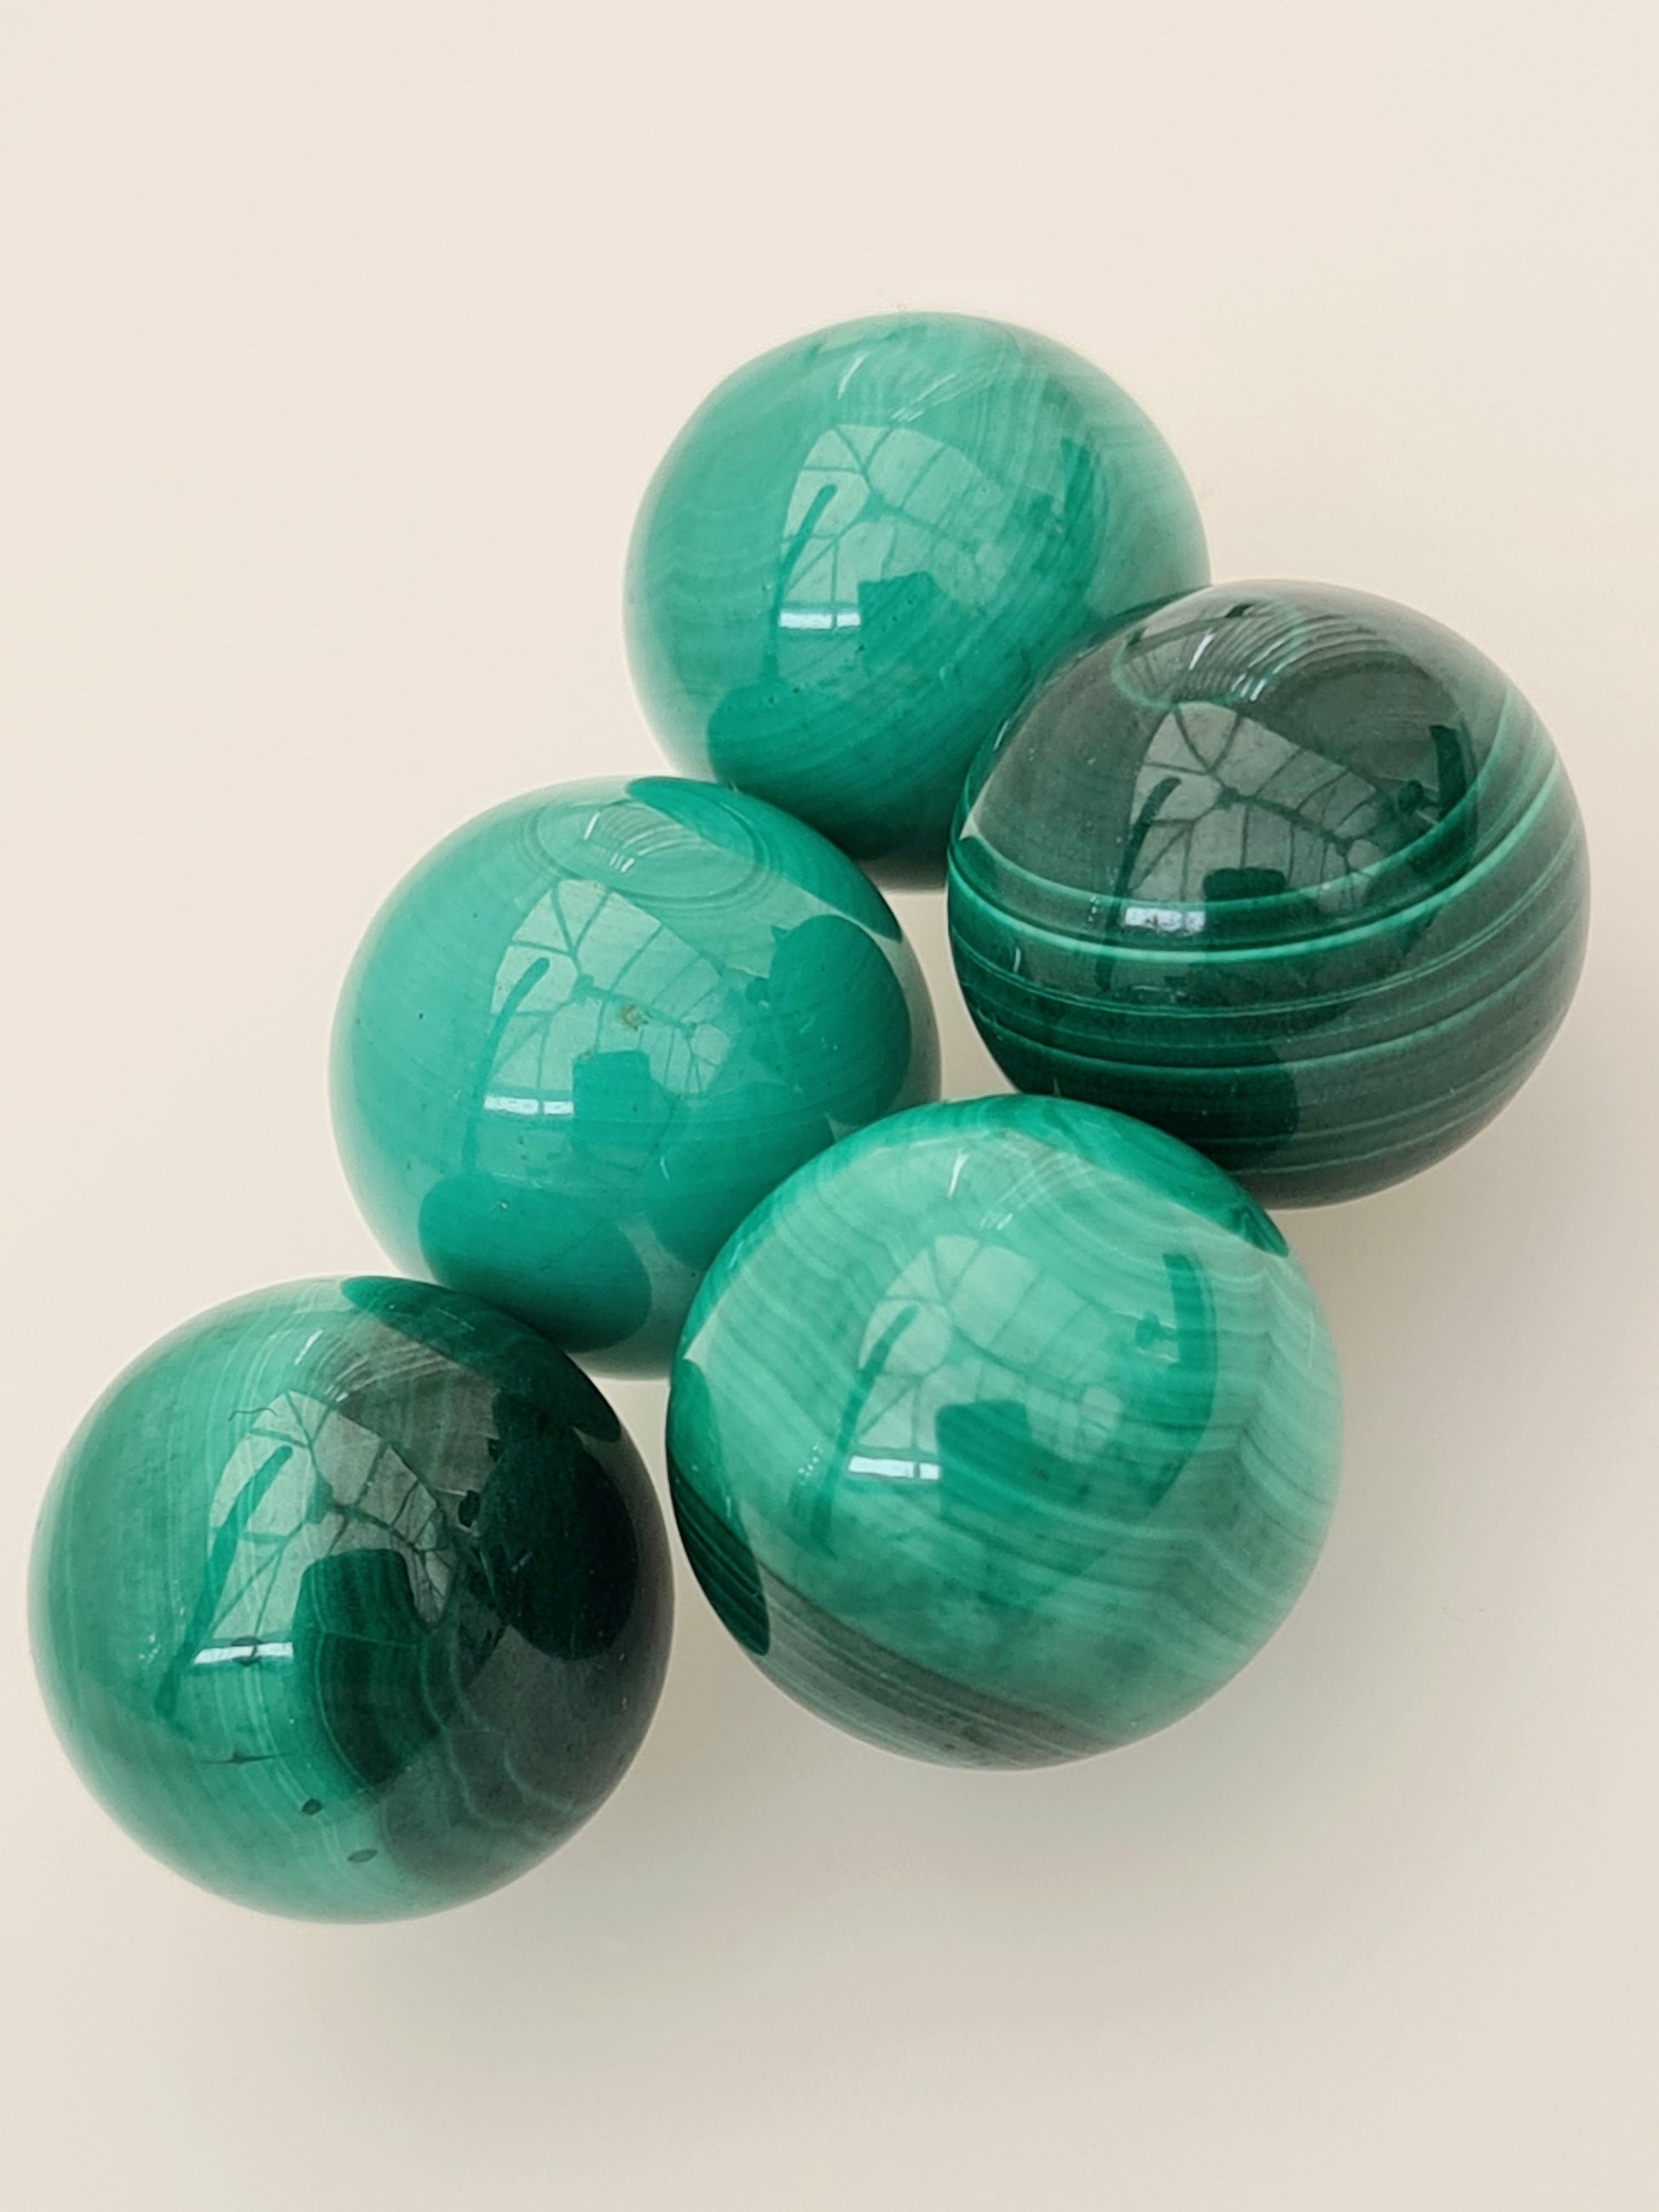 Mini malachite spheres in different tones of green with natural banding. 11mm diameter size.